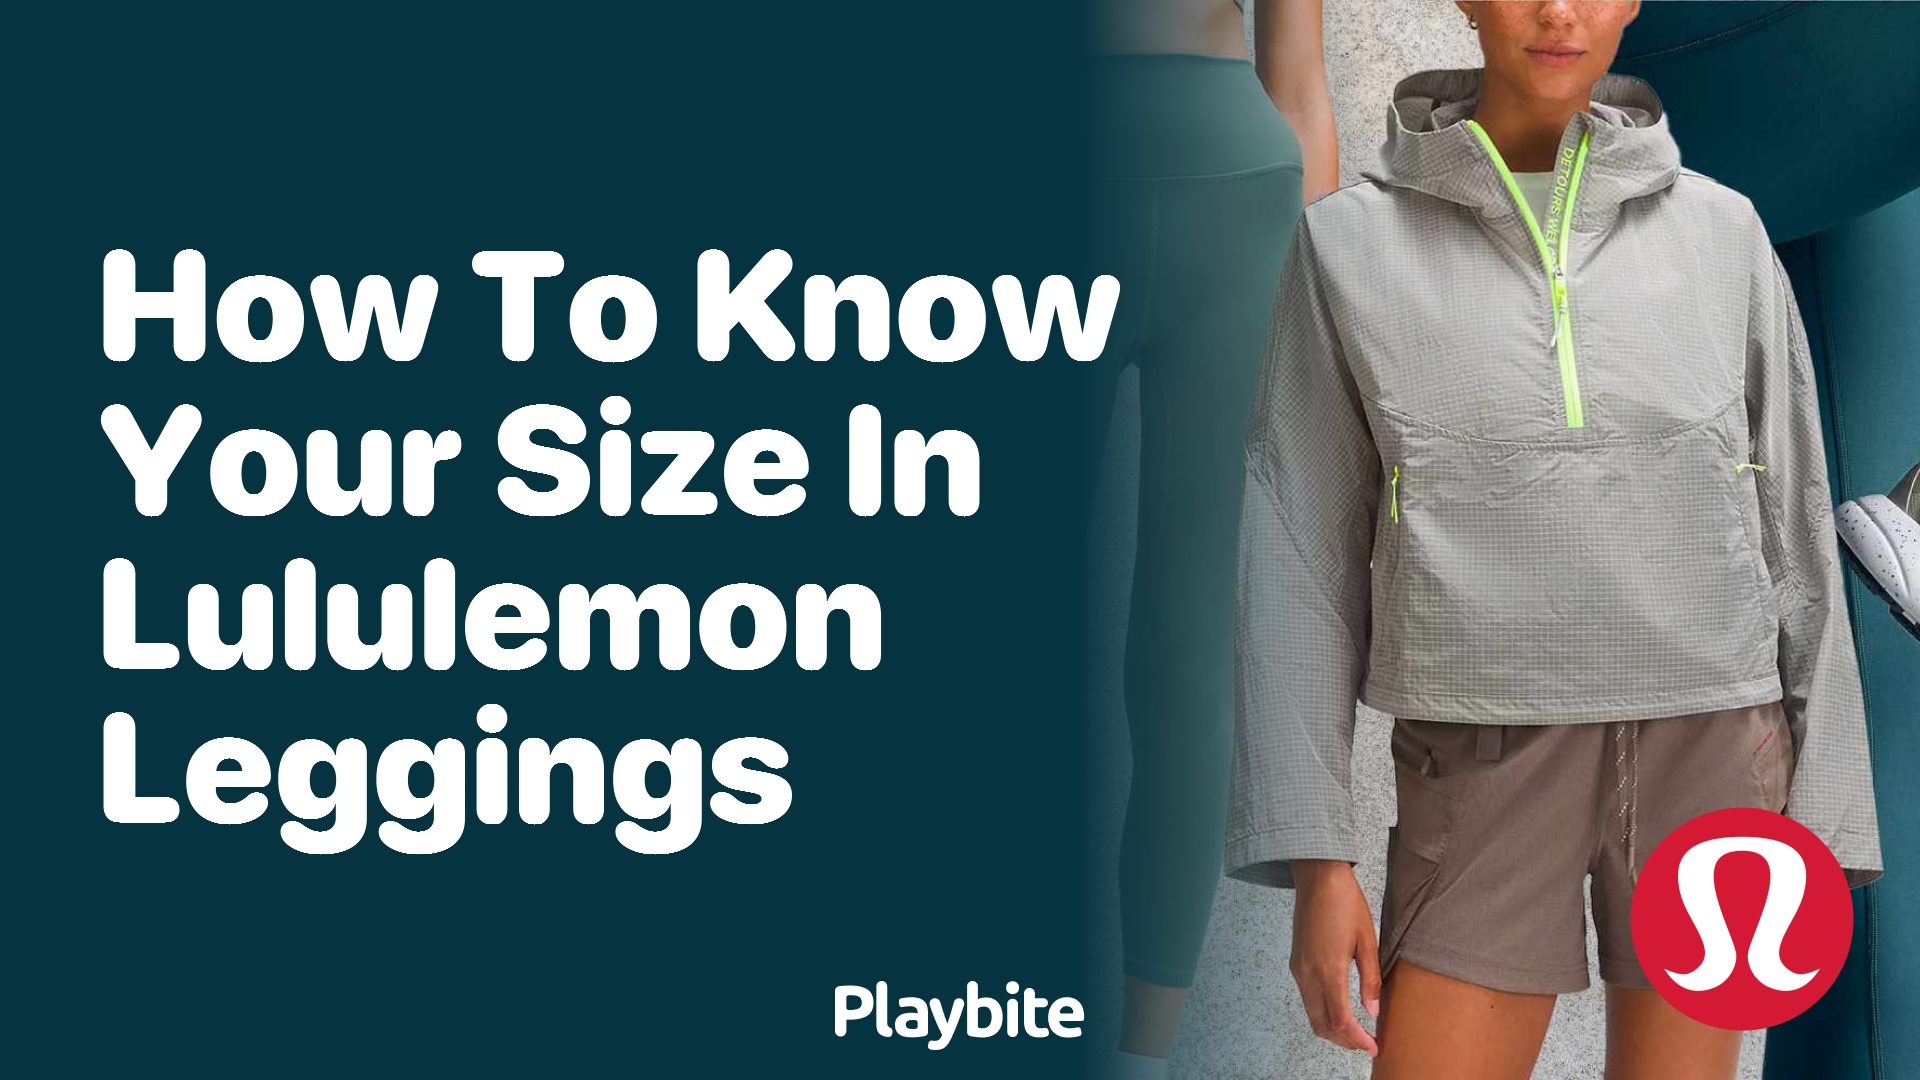 How to Find Your Size in Lululemon Leggings - Playbite